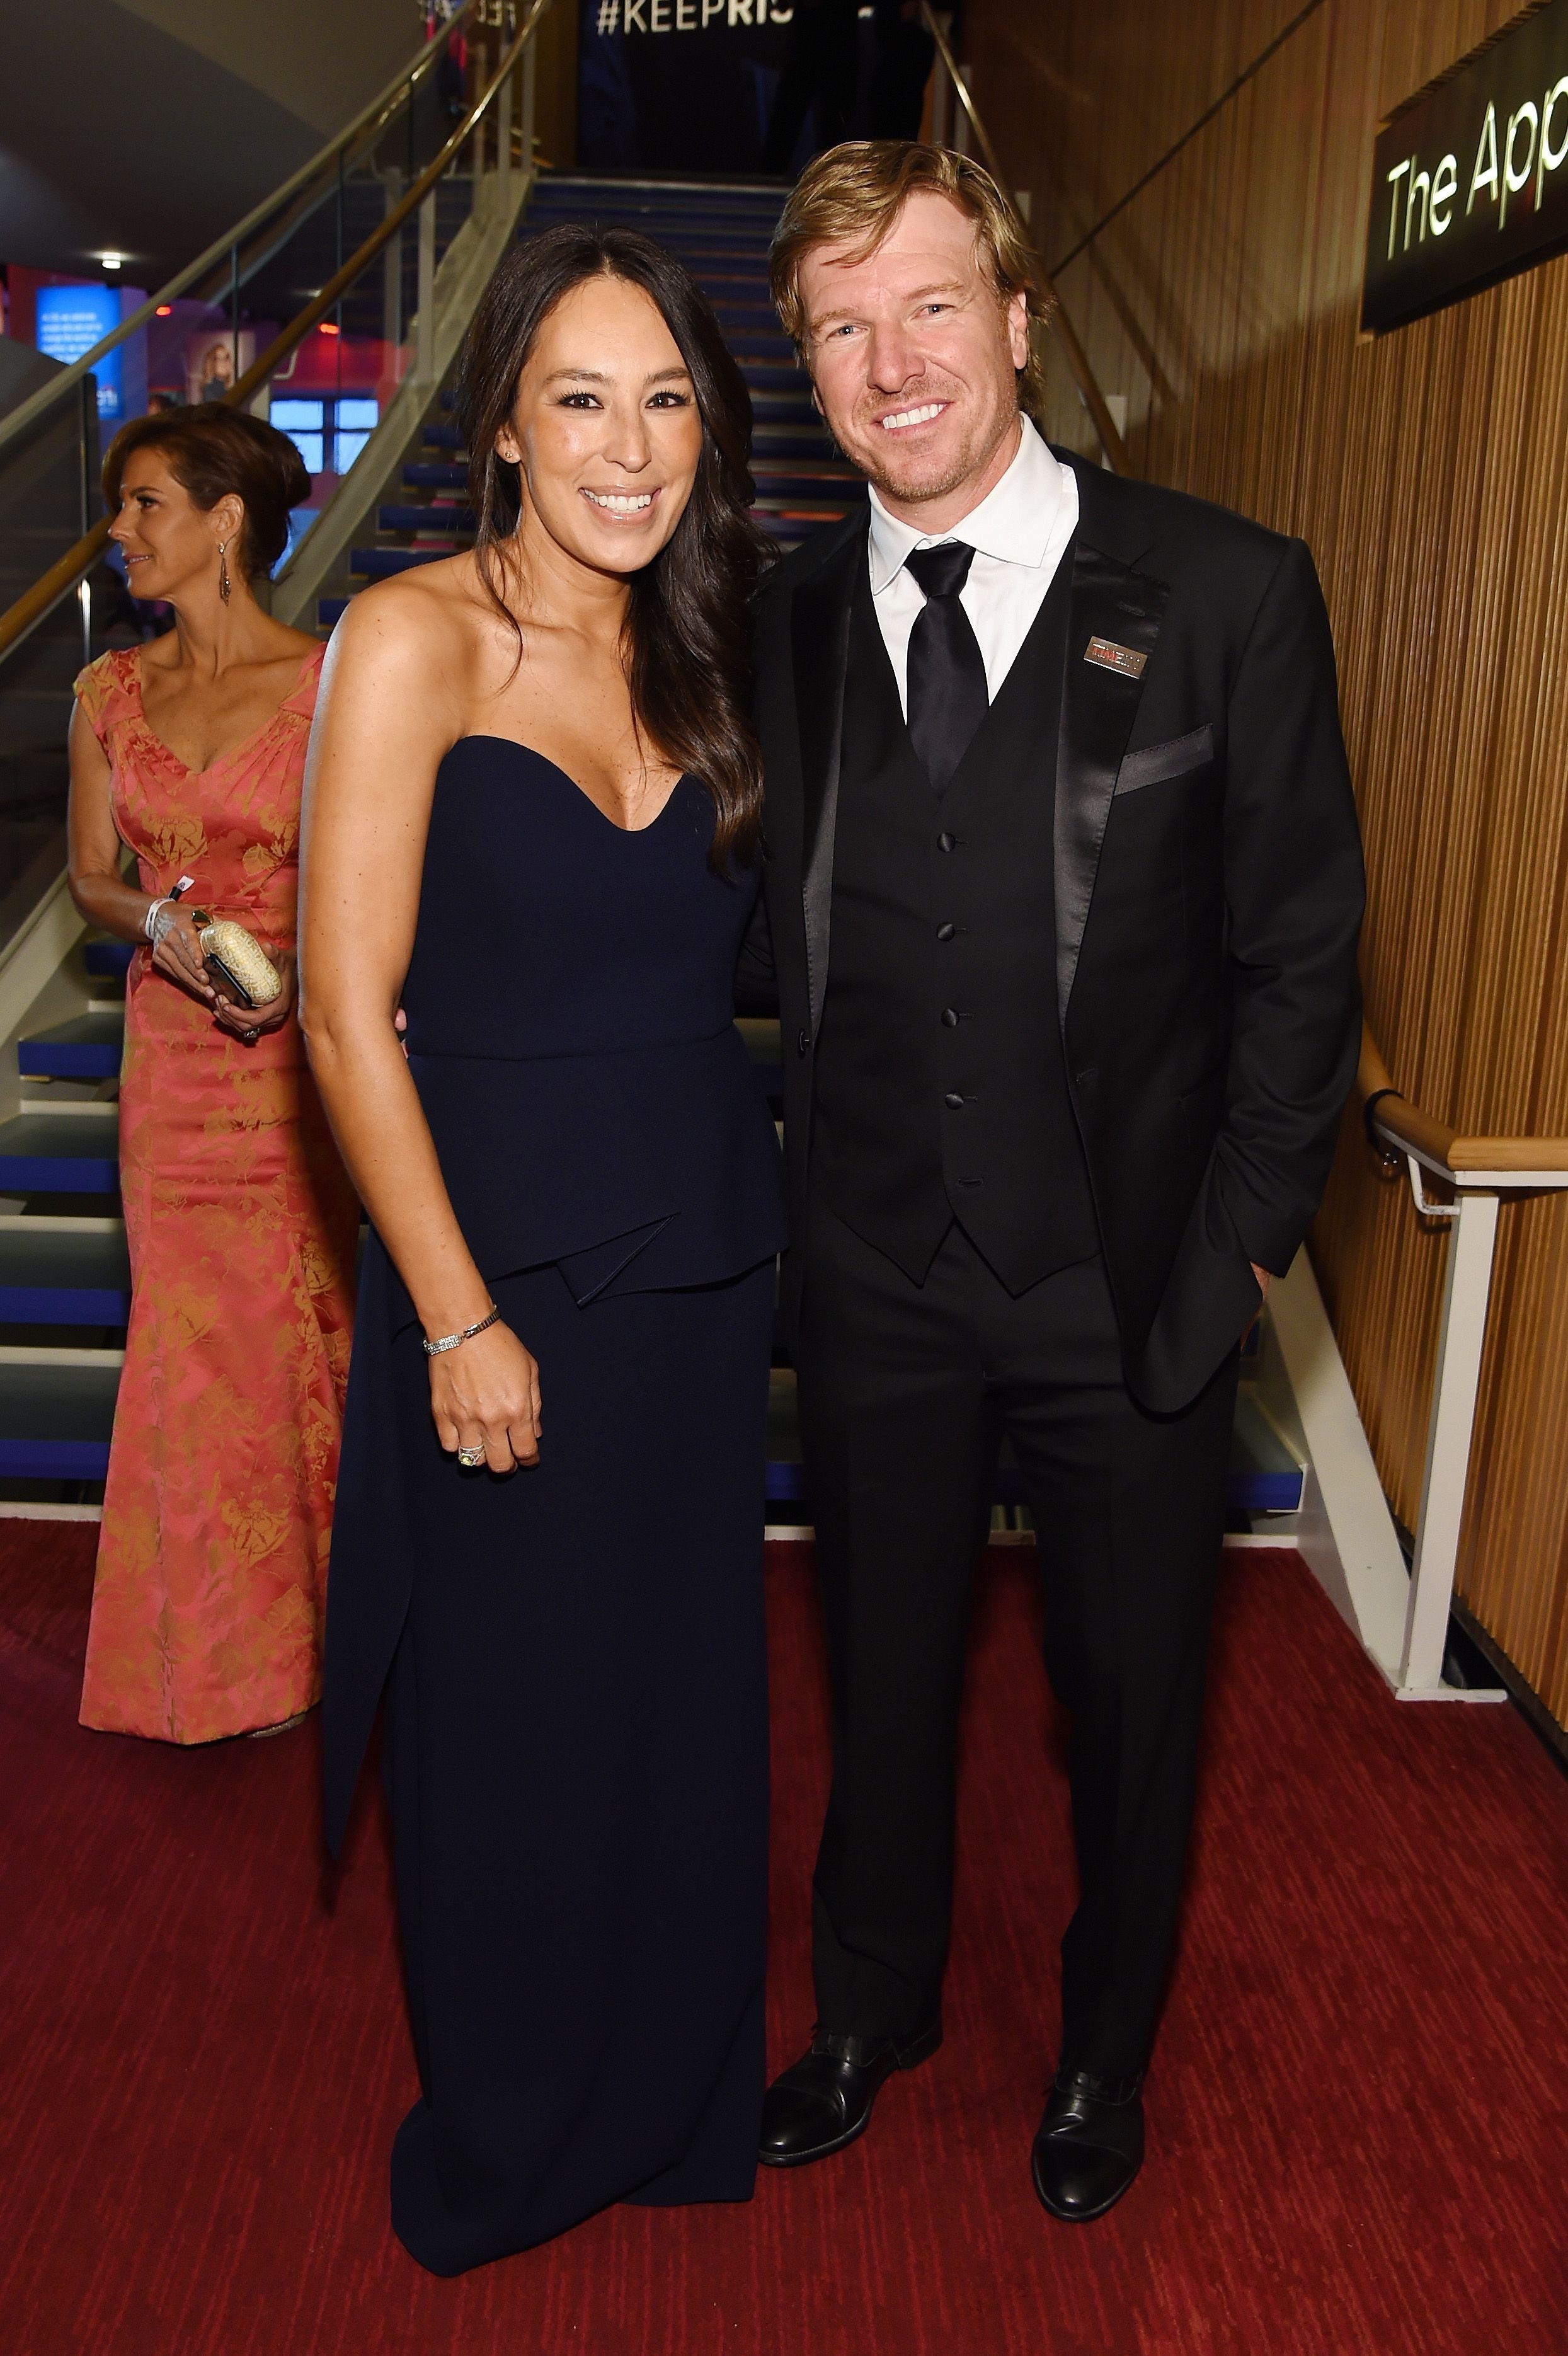 Joanna and Chip Gaines at the TIME 100 Gala Cocktails at Jazz at Lincoln Center on April 23, 2019 | Photo: Getty Images